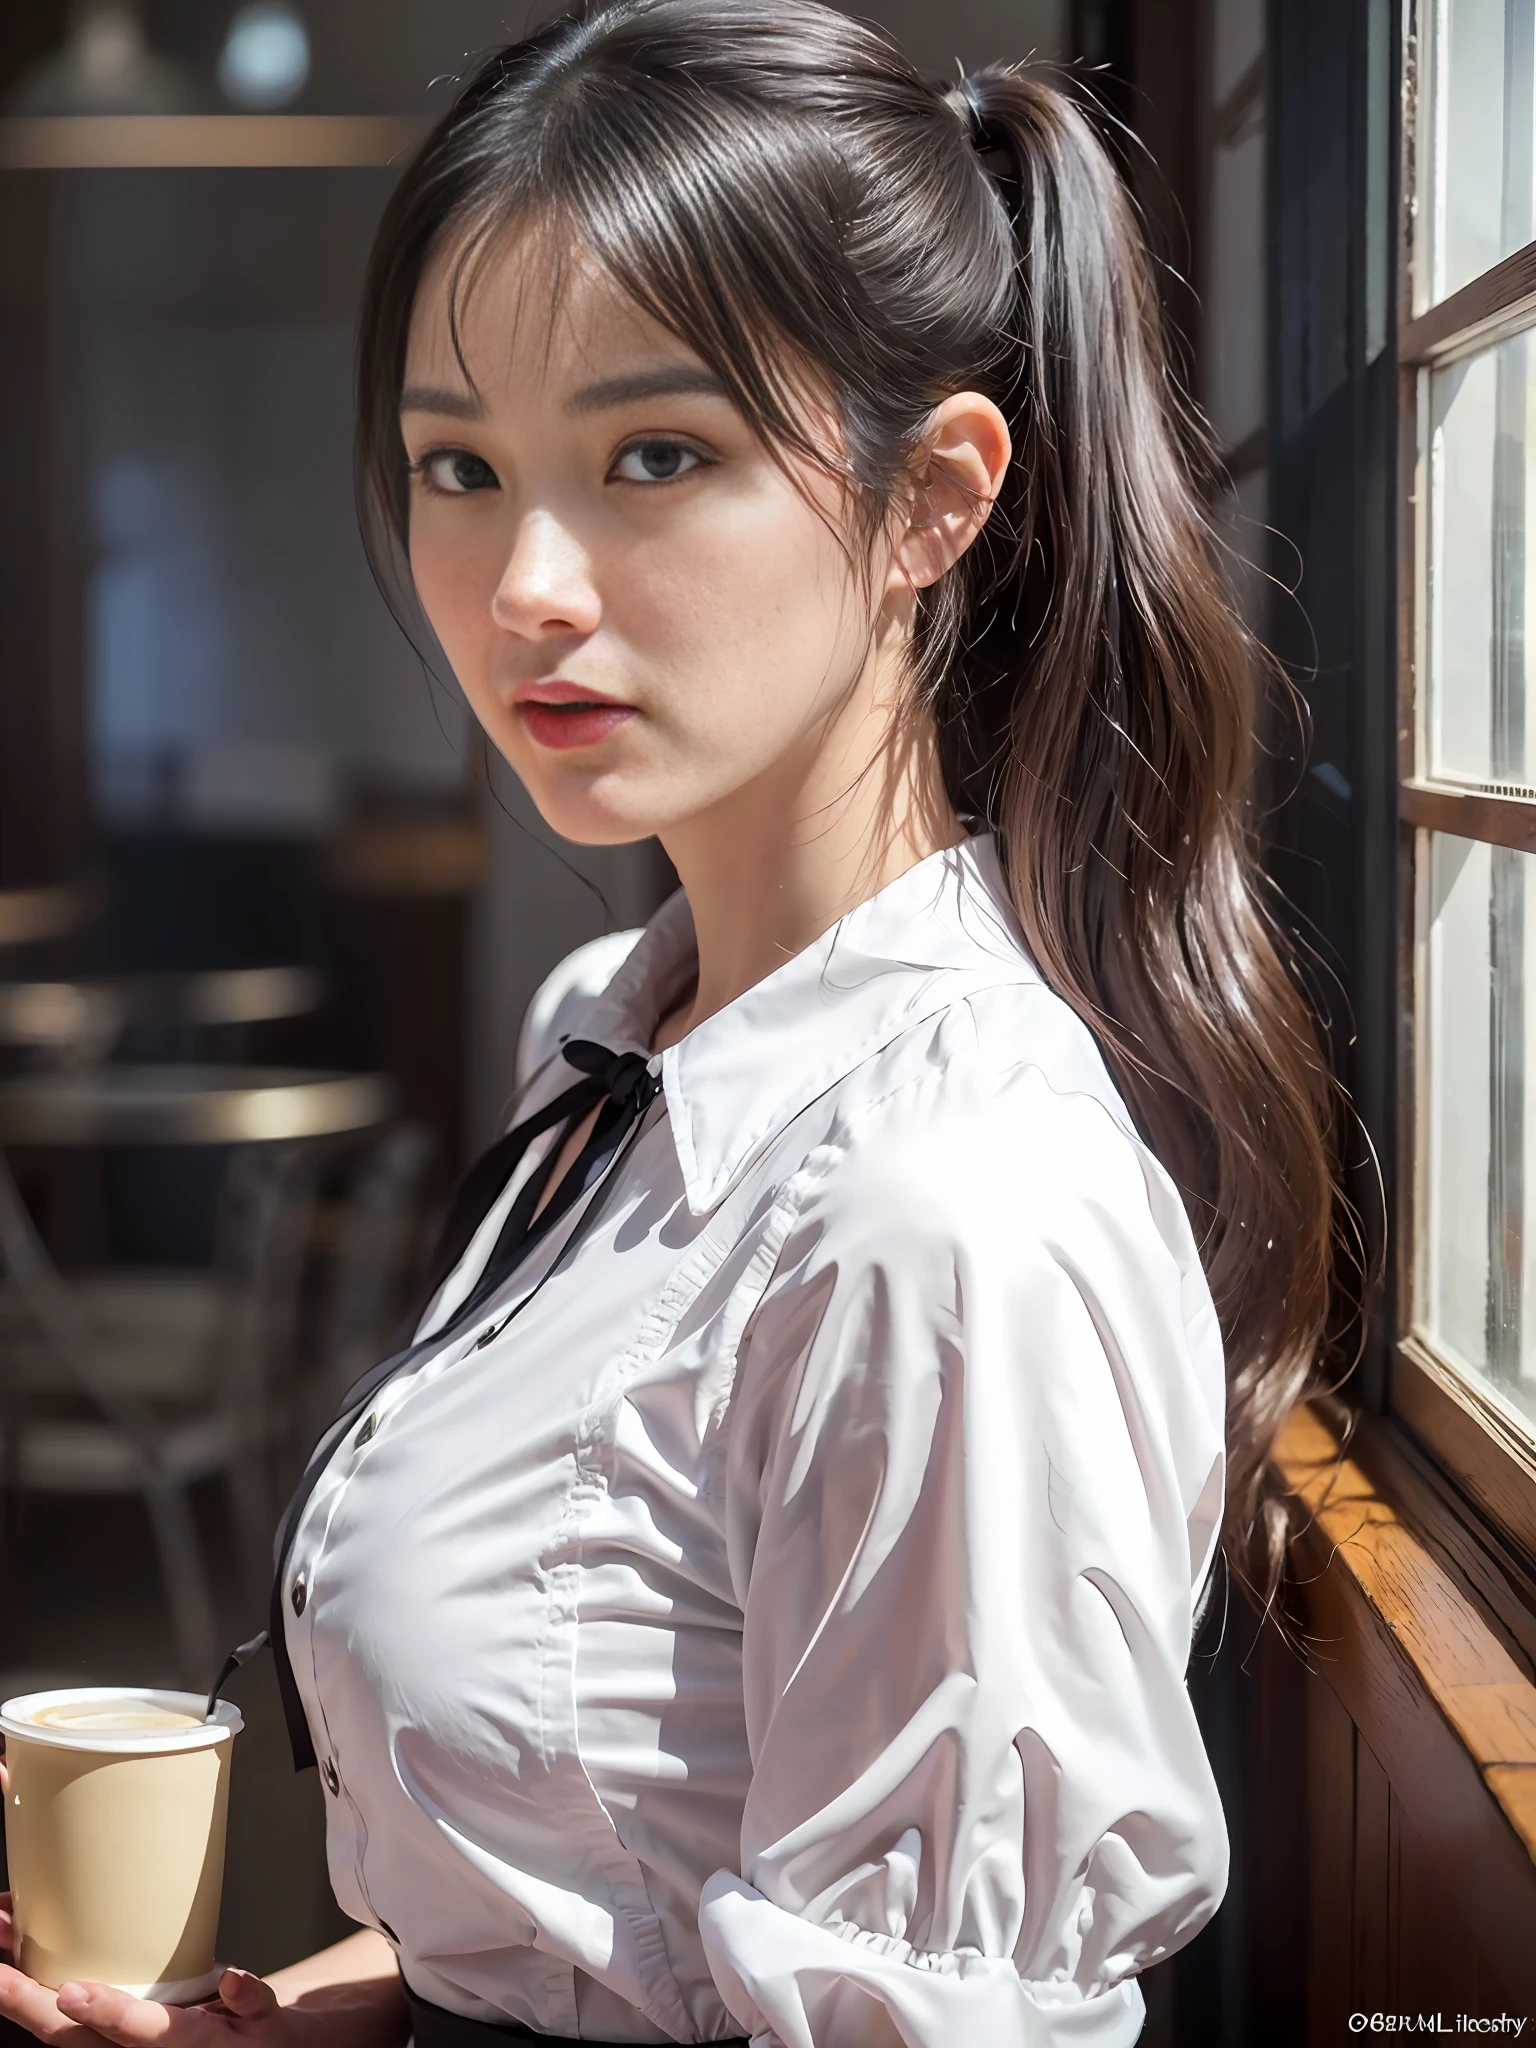 mature barista woman, (masterpiece: 1.3), (8k, photorealistic, RAW photos, best quality: 1.4), (1girl), shallow depth of field, focused face, soft focus, beautiful face, (backlight: 1.5), (surroundings: 1.3), (realistic face), (black hair, medium short: 1.3), loose wavy hair, short bangs, Ponytail, Pigtails, Braids, Realistic eyes, Dark brown eyes, Pupil highlights, Beautiful detail eyes, (plenty of natural light), (Realistic skin), Beautiful skin, (White collar blouse), (Apron), (Carrying tray), Absurd, Attractive, Ultra High Definition, Ultra Realistic, High Definition, Golden Ratio, Detailed Cafe Dining Background, Blackboard Menu, Backlight from the back window, pale skylight with natural light, natural light lighting from diagonally in front of the face, (small head), (small), perfect anatomy